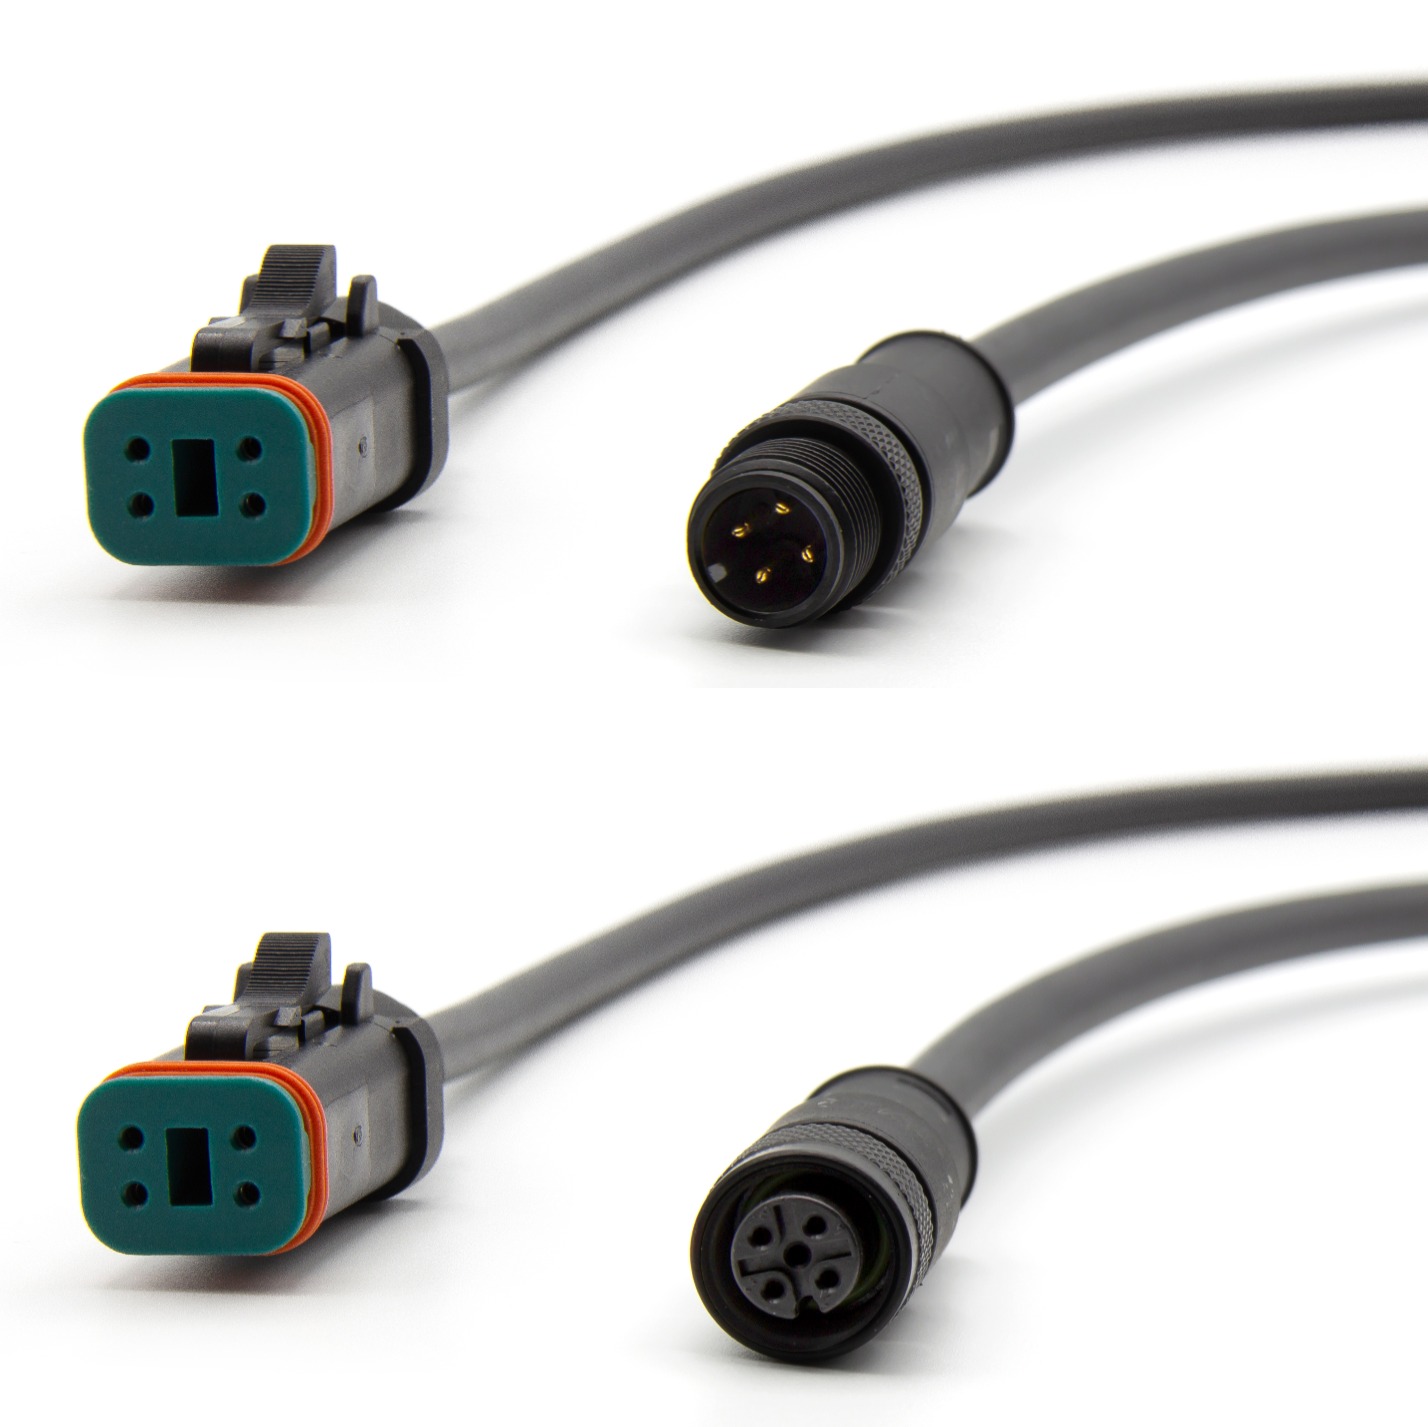 cable assemblies from binder M12-DT series